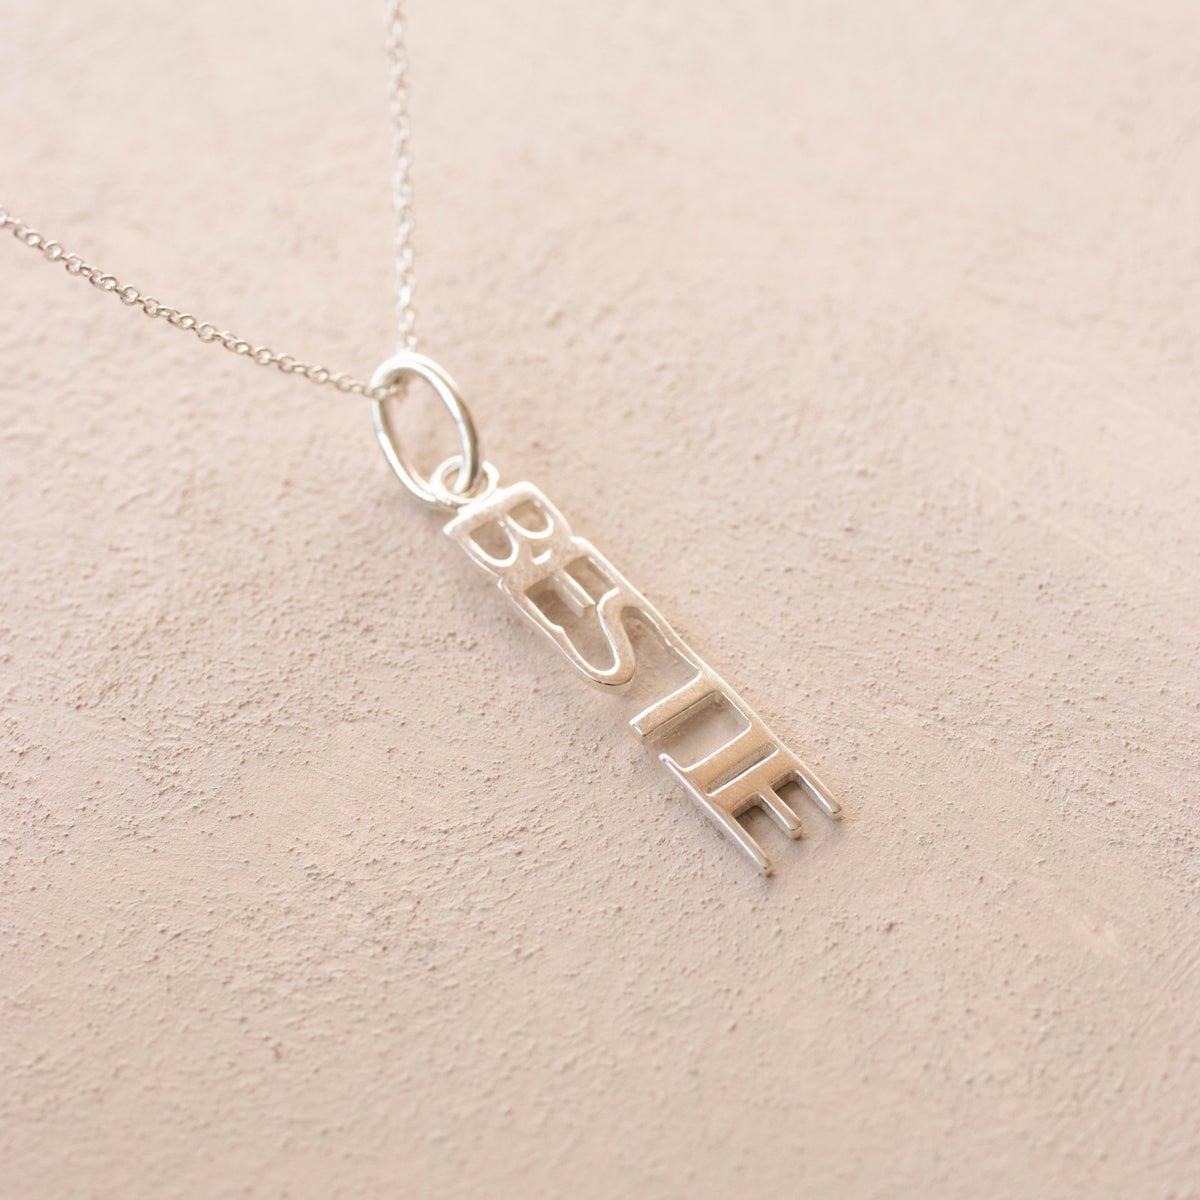 BESTIE FEARLESS NAMESAKE NECKLACE - SILVER - SO PRETTY CARA COTTER